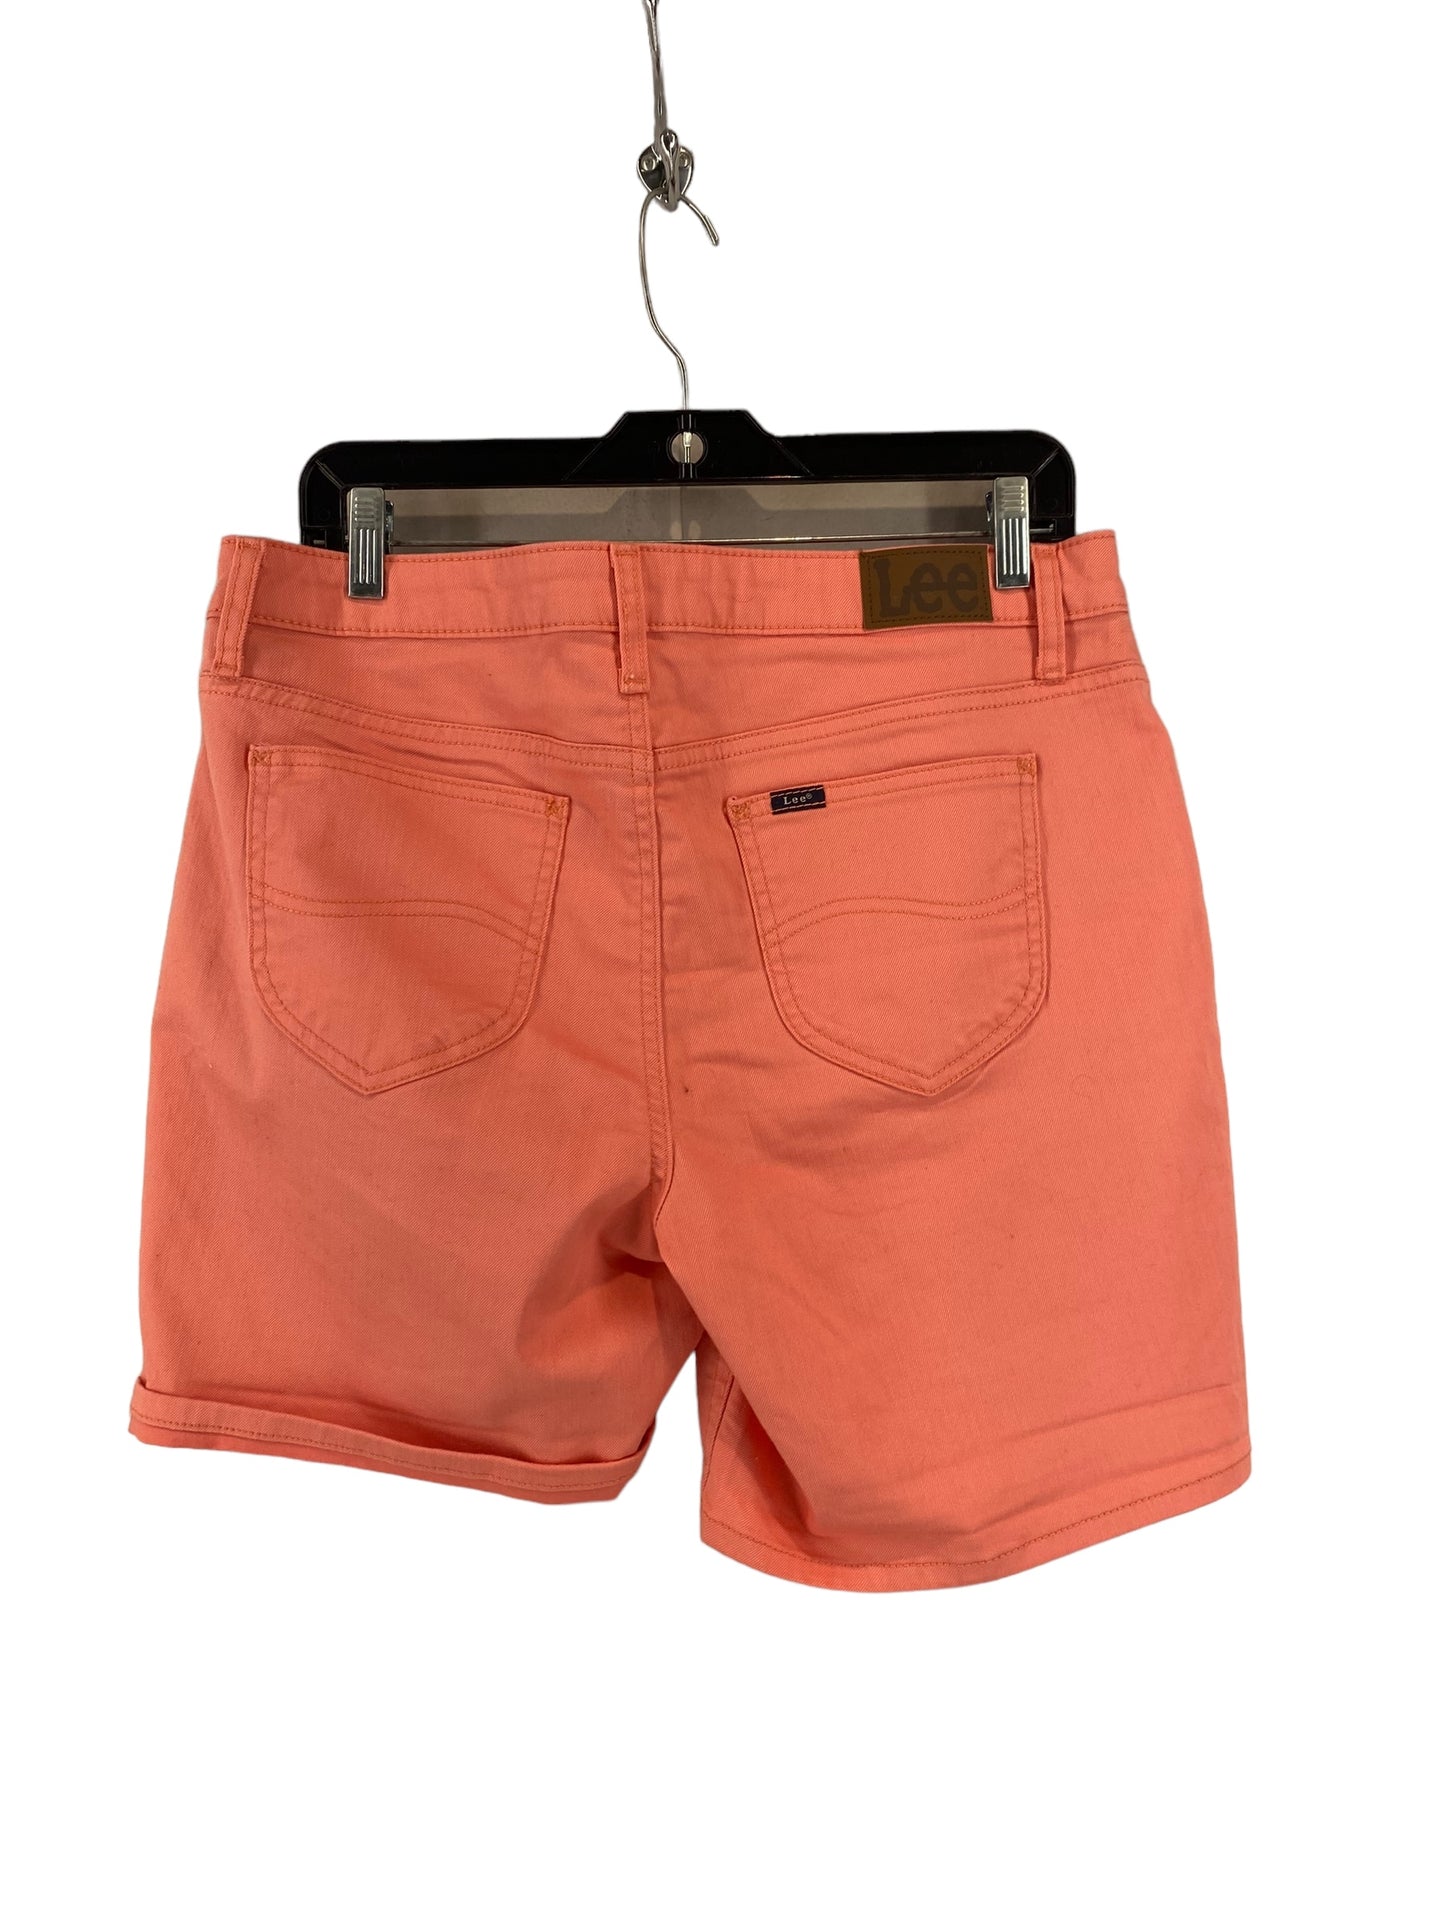 Shorts By Lee  Size: 12